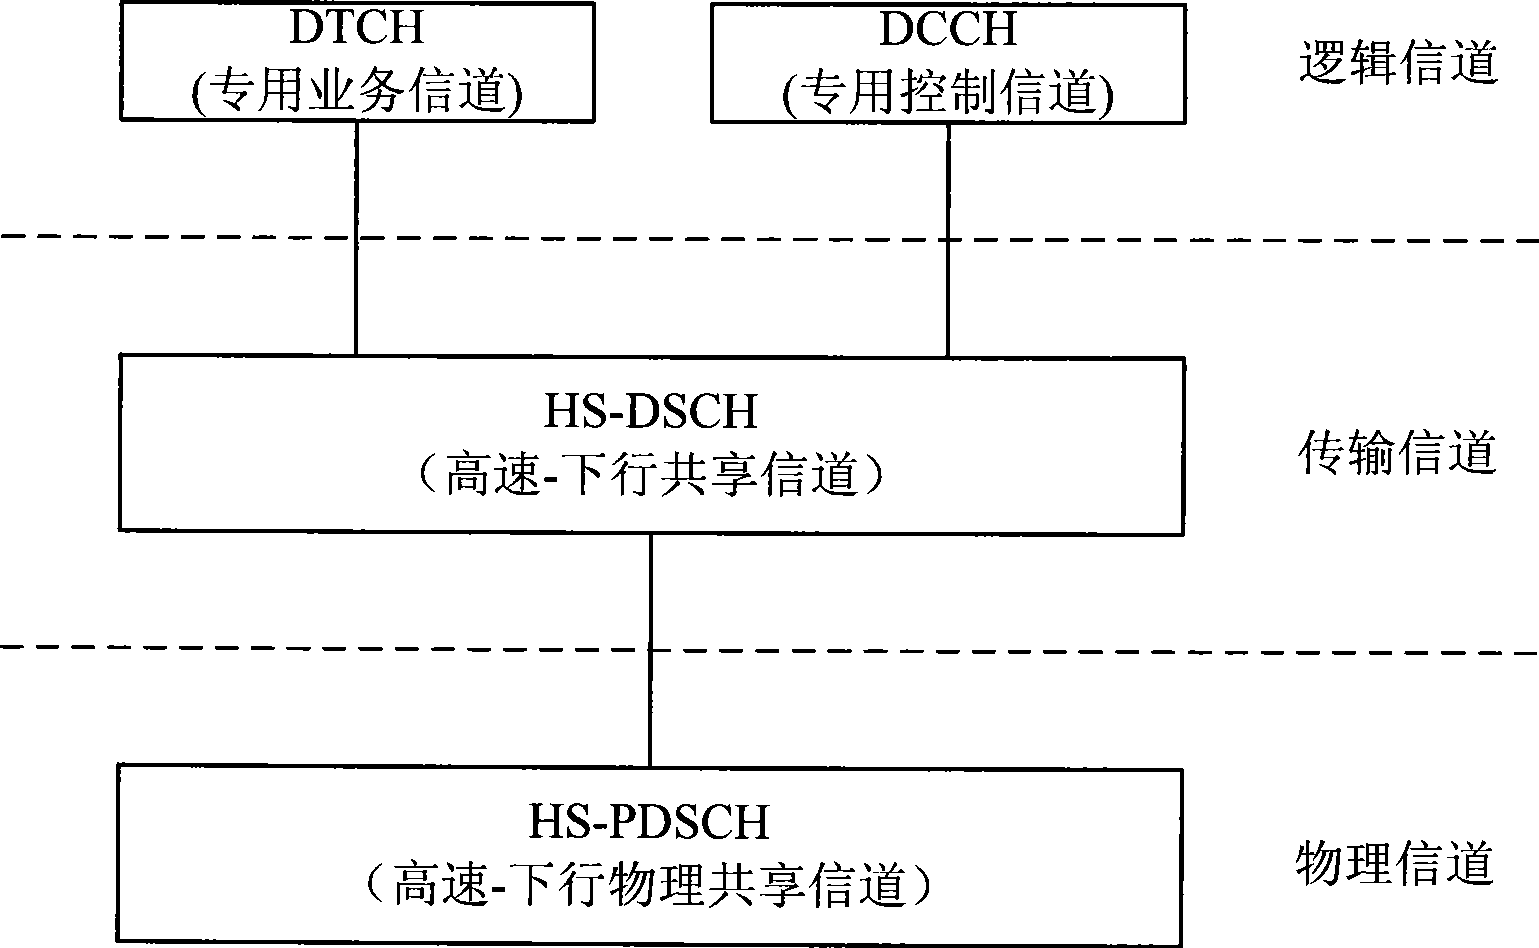 Transmission method for high-speed downlink shared channel under non-CELL_DCH state